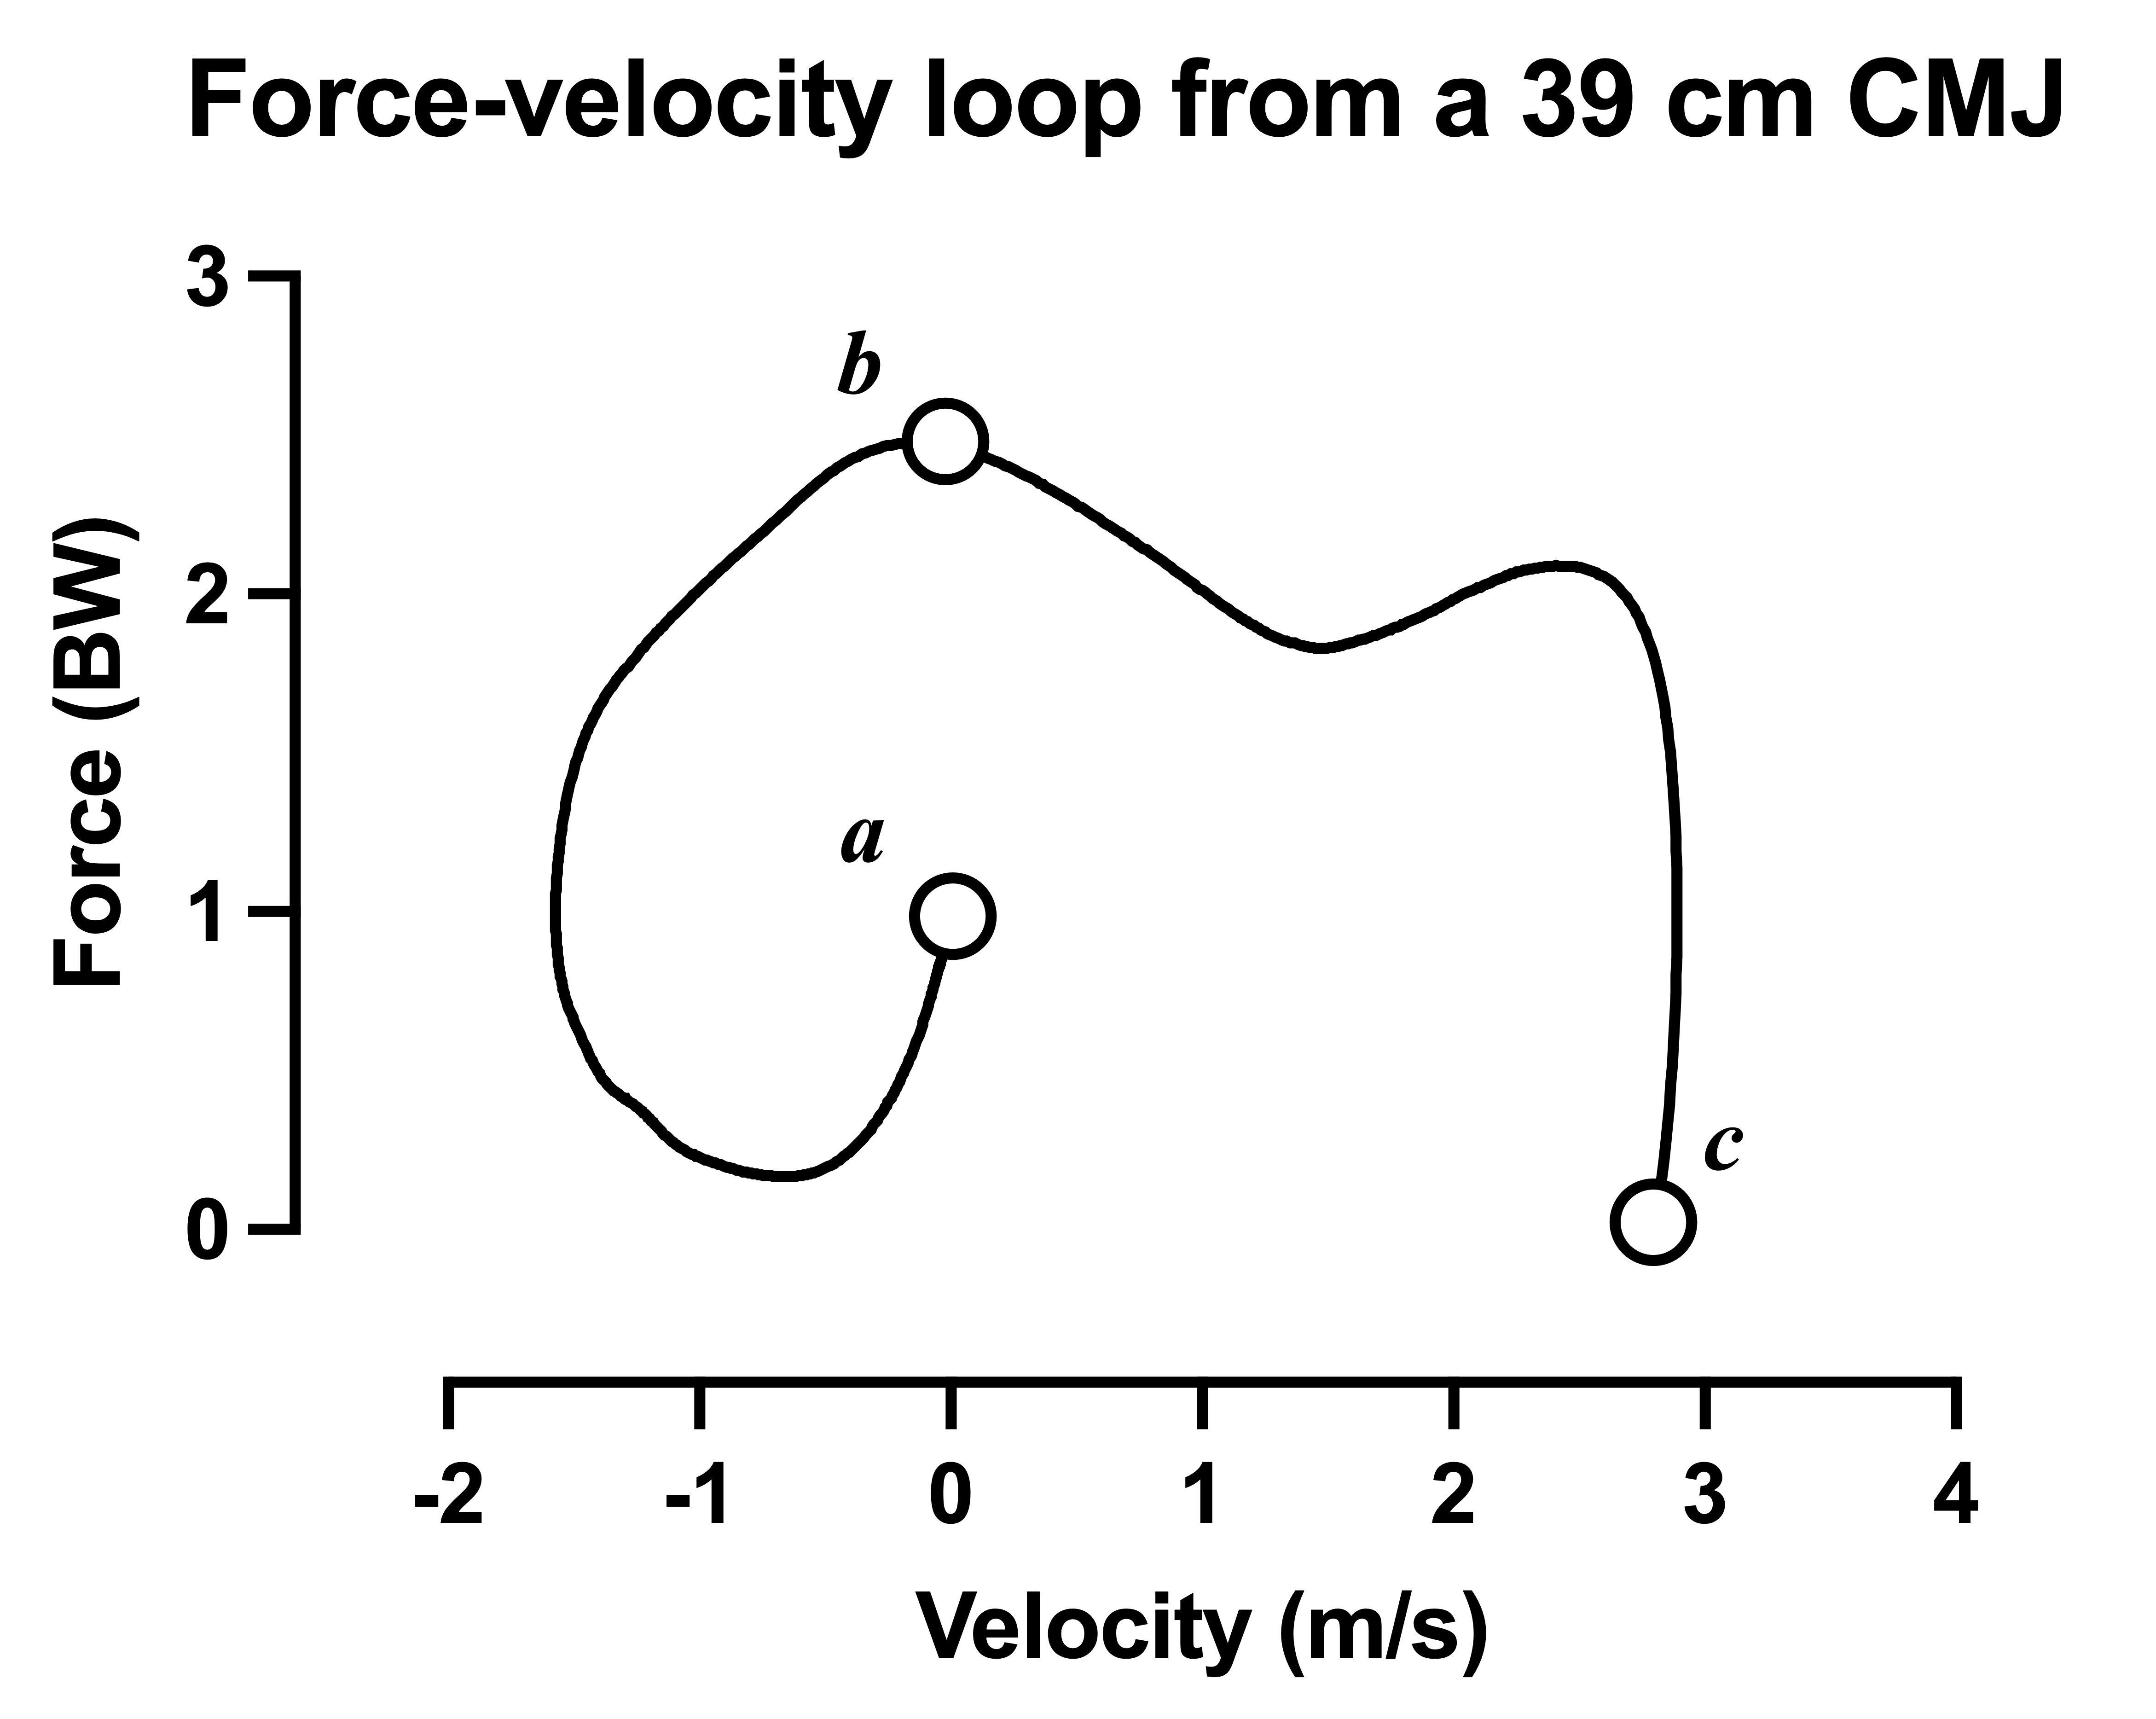 normalized force-velocity loop